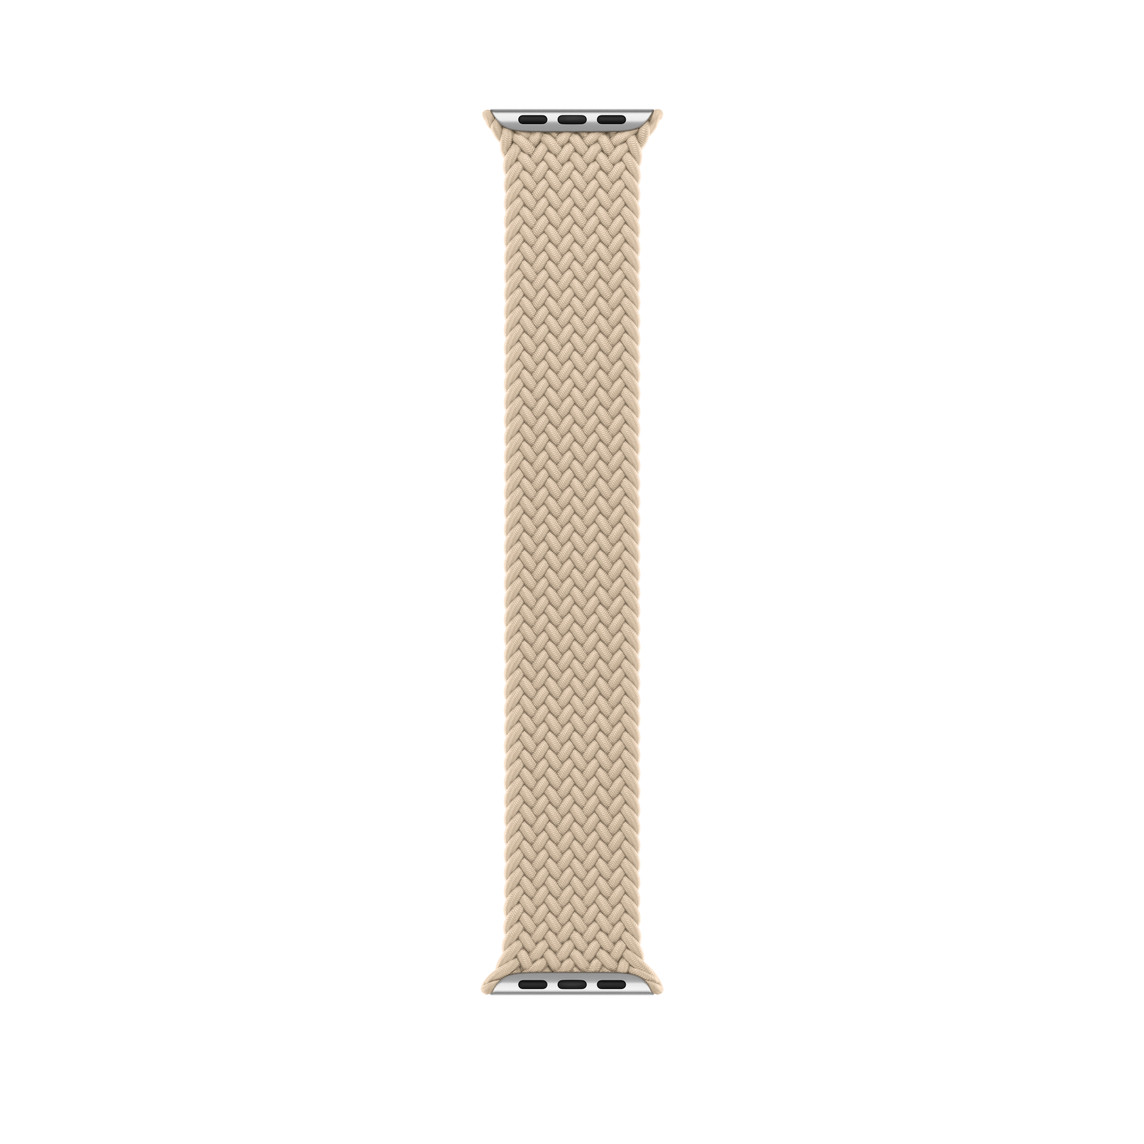 Beige Braided Solo Loop band, woven polyester and silicone threads with no clasps or buckles